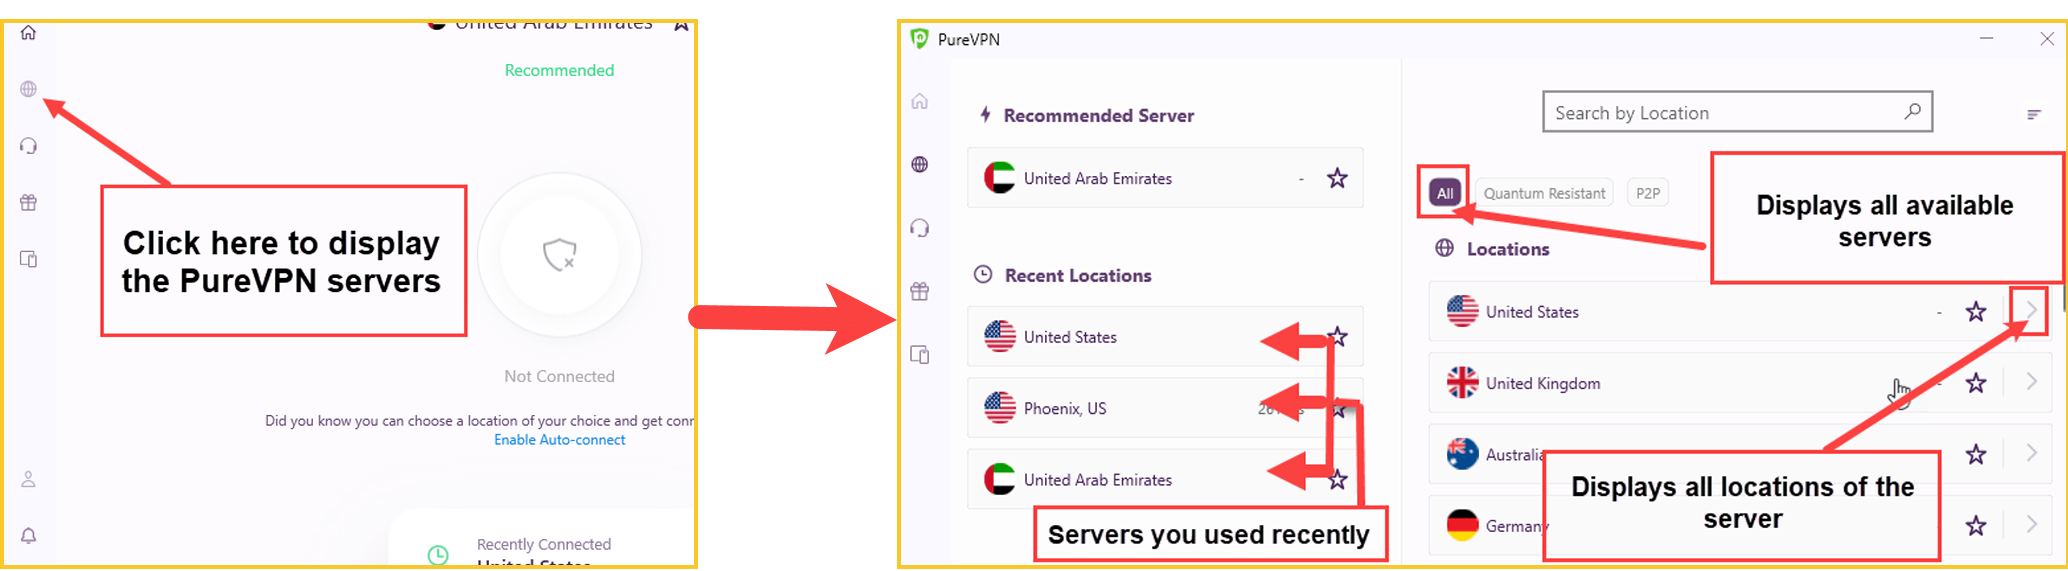 purevpn-server-locations-interface-in-Germany